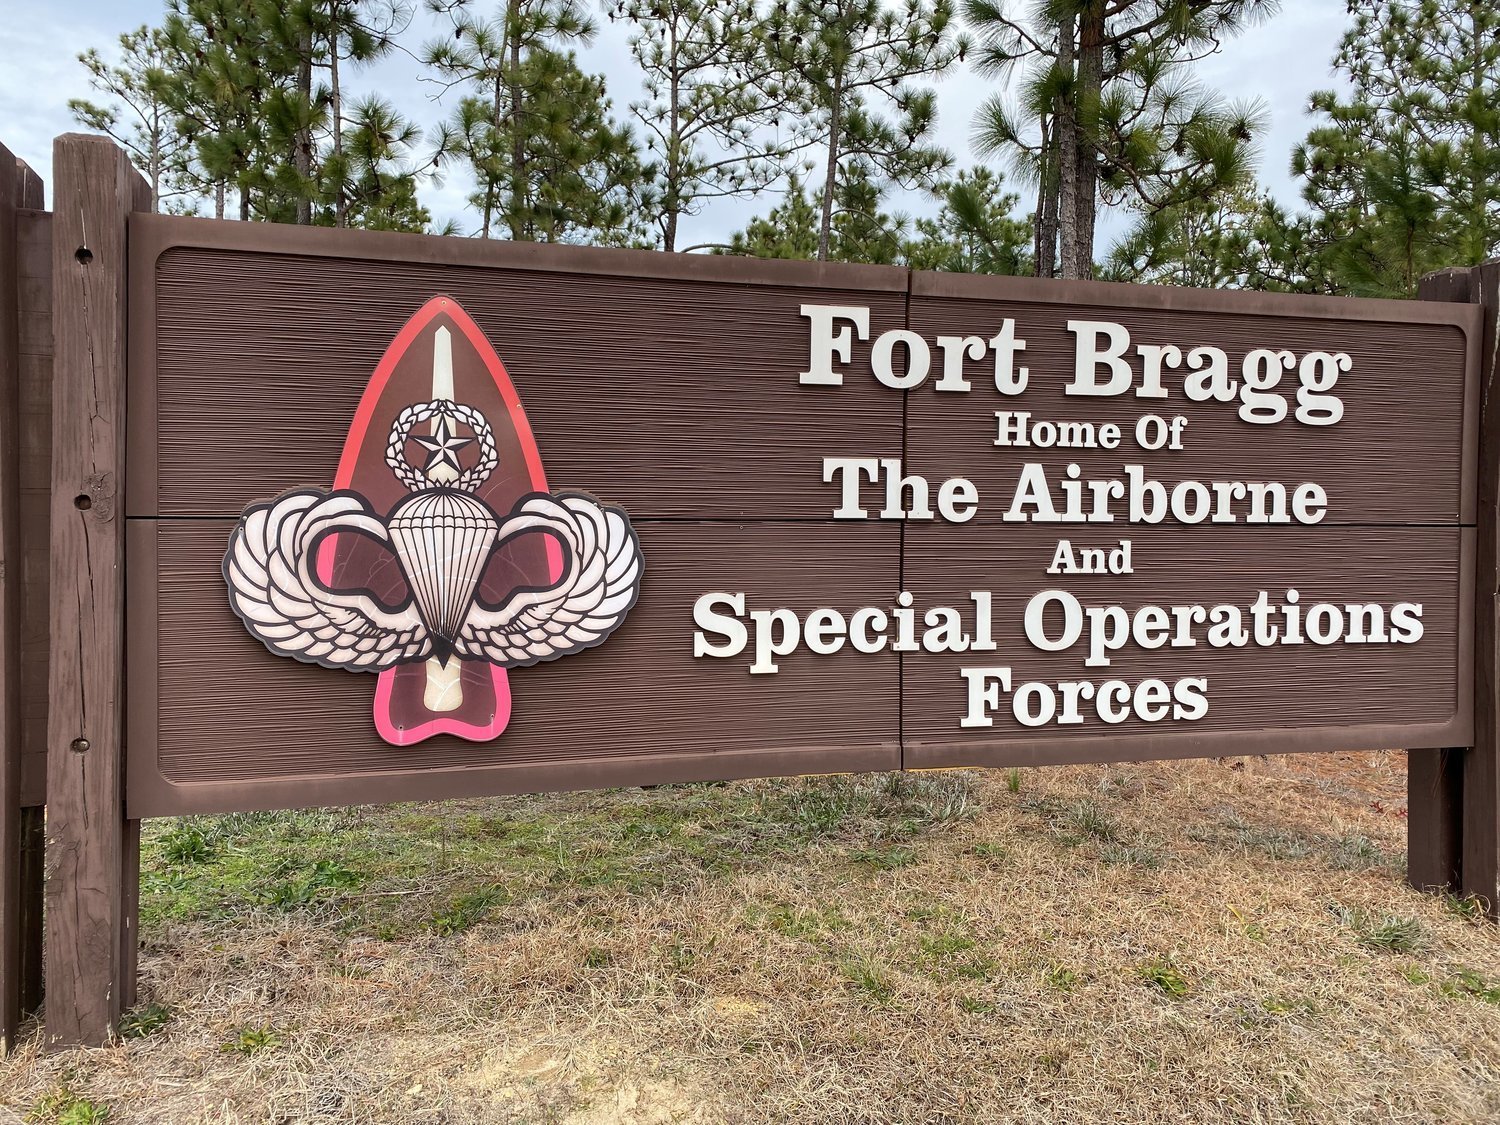 The federal commission responsible for recommending name changes for Department of Defense installations that commemorate the Confederacy estimates it will cost nearly $6.4 million to rename Fort Bragg.